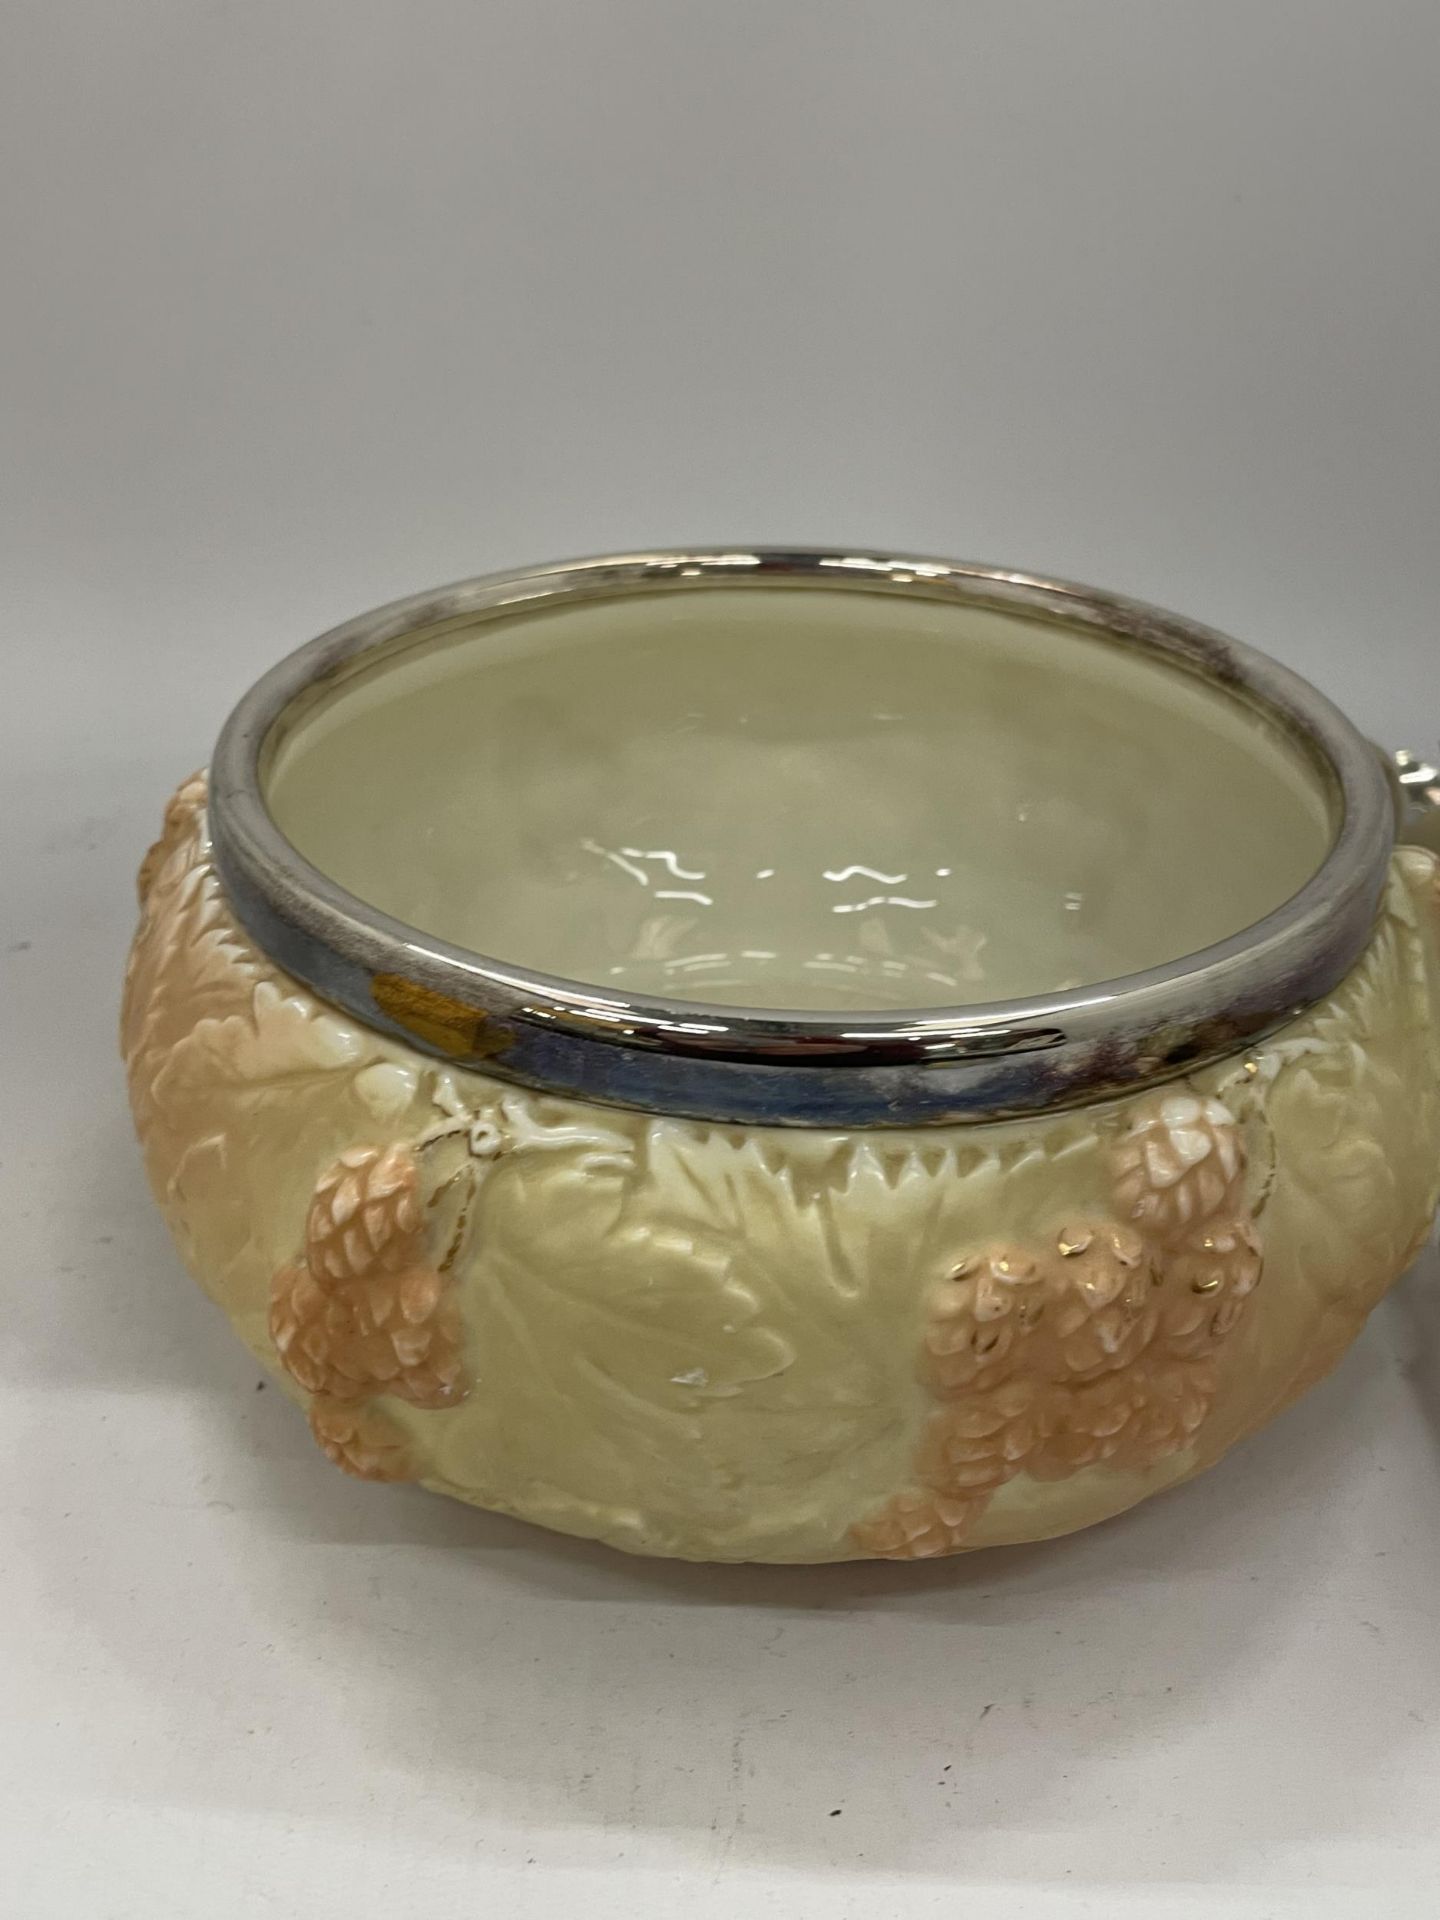 A VINTAGE BLUSH IVORY CERAMIC BOWL WITH SILVER PLATED RIM AND MATCHING SALAD SERVERS - Image 2 of 4